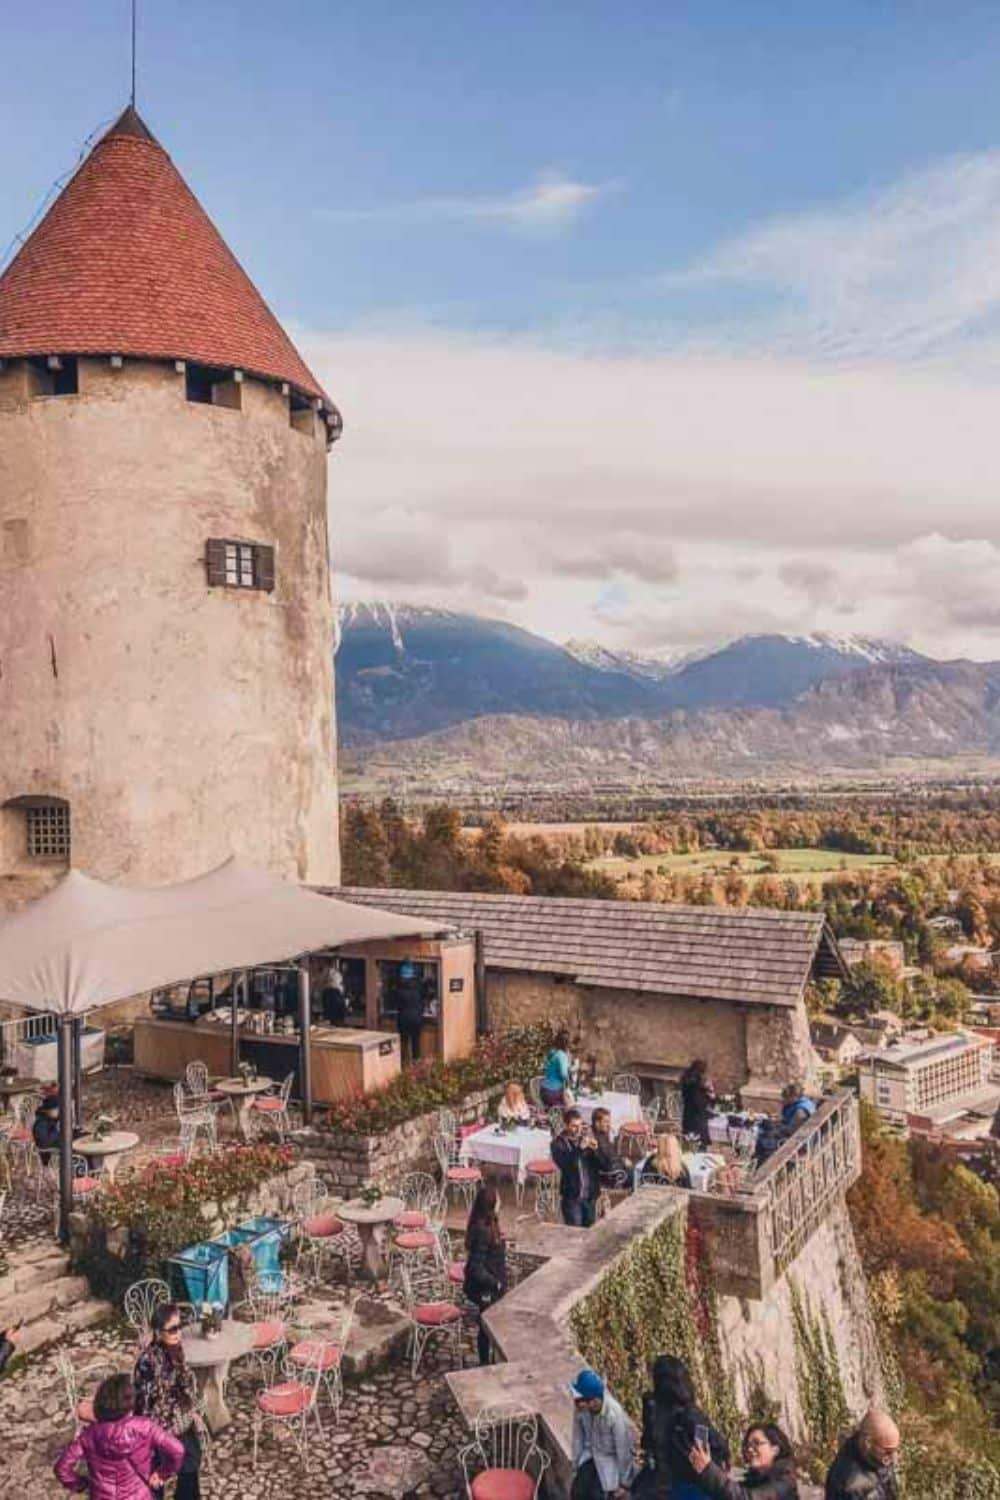 An outdoor terrace café located at the top of a hill, beside the tall stone tower of a castle, offers panoramic views over a picturesque landscape. Guests are seated at various tables, enjoying the scene under the shelter of a large white umbrella. Beyond the café, the expanse of Lake Bled is visible, surrounded by forested areas and mountains in the distance, under a vast sky with a mixture of clouds and blue patches.